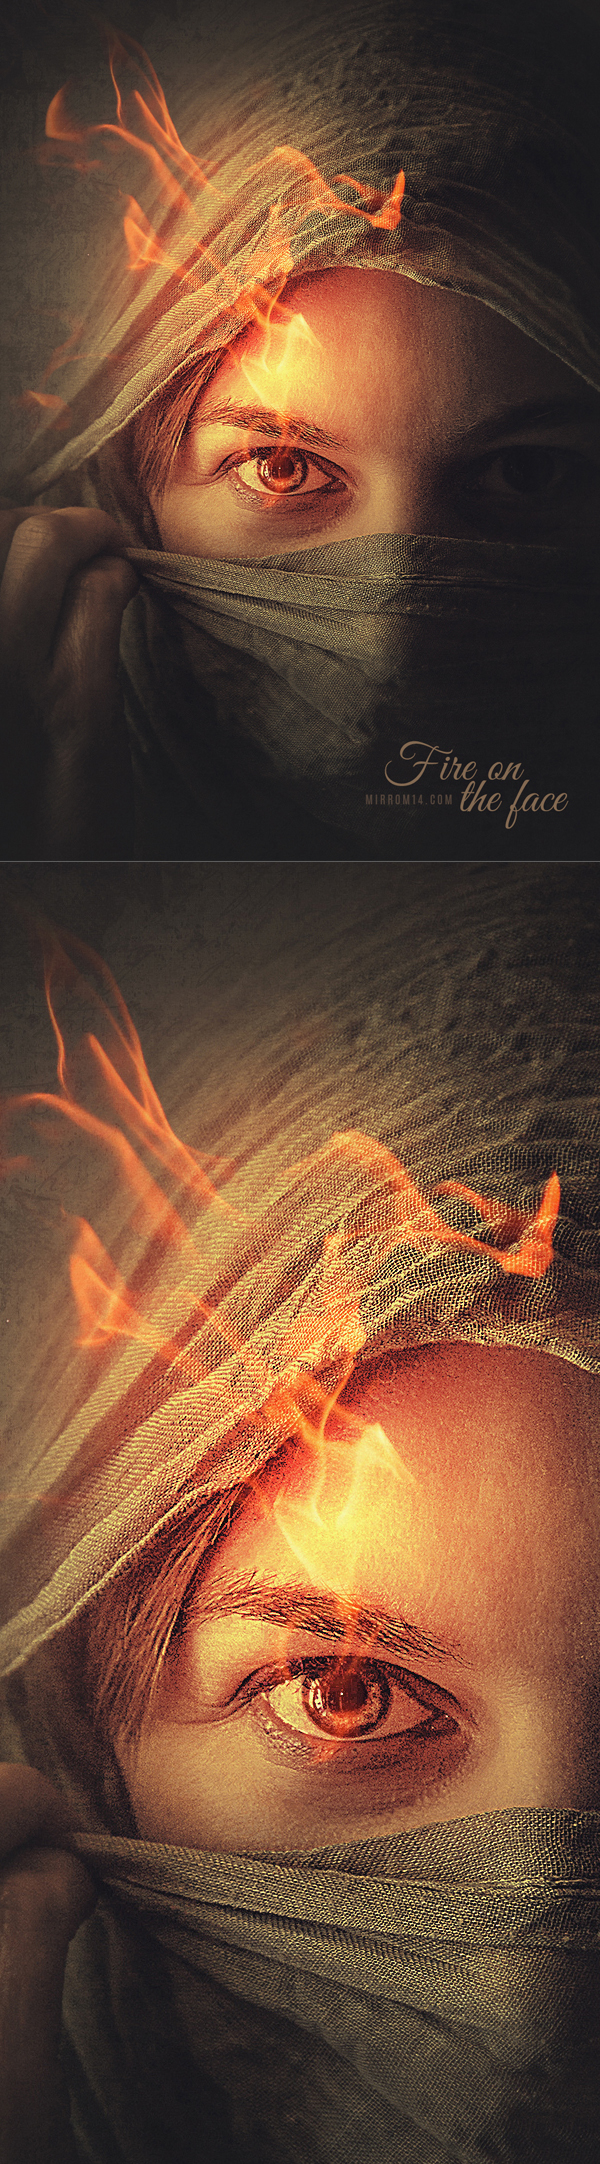 Create a Fire on The Face Portrait Photo Effect Photoshop Tutorial